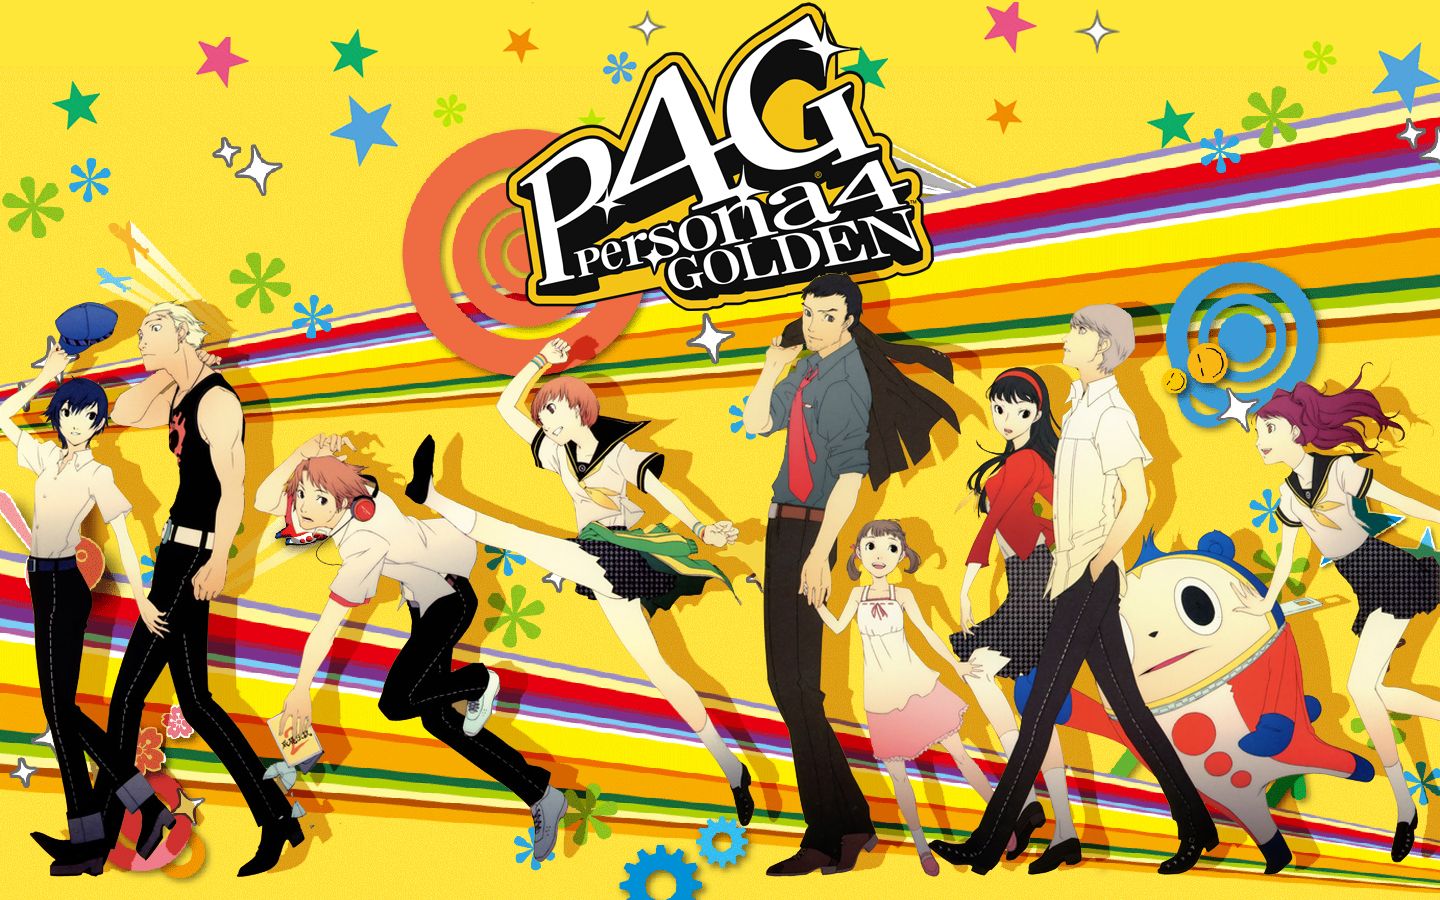 Persona 4 Golden shows up on SteamDB listing, could be announced